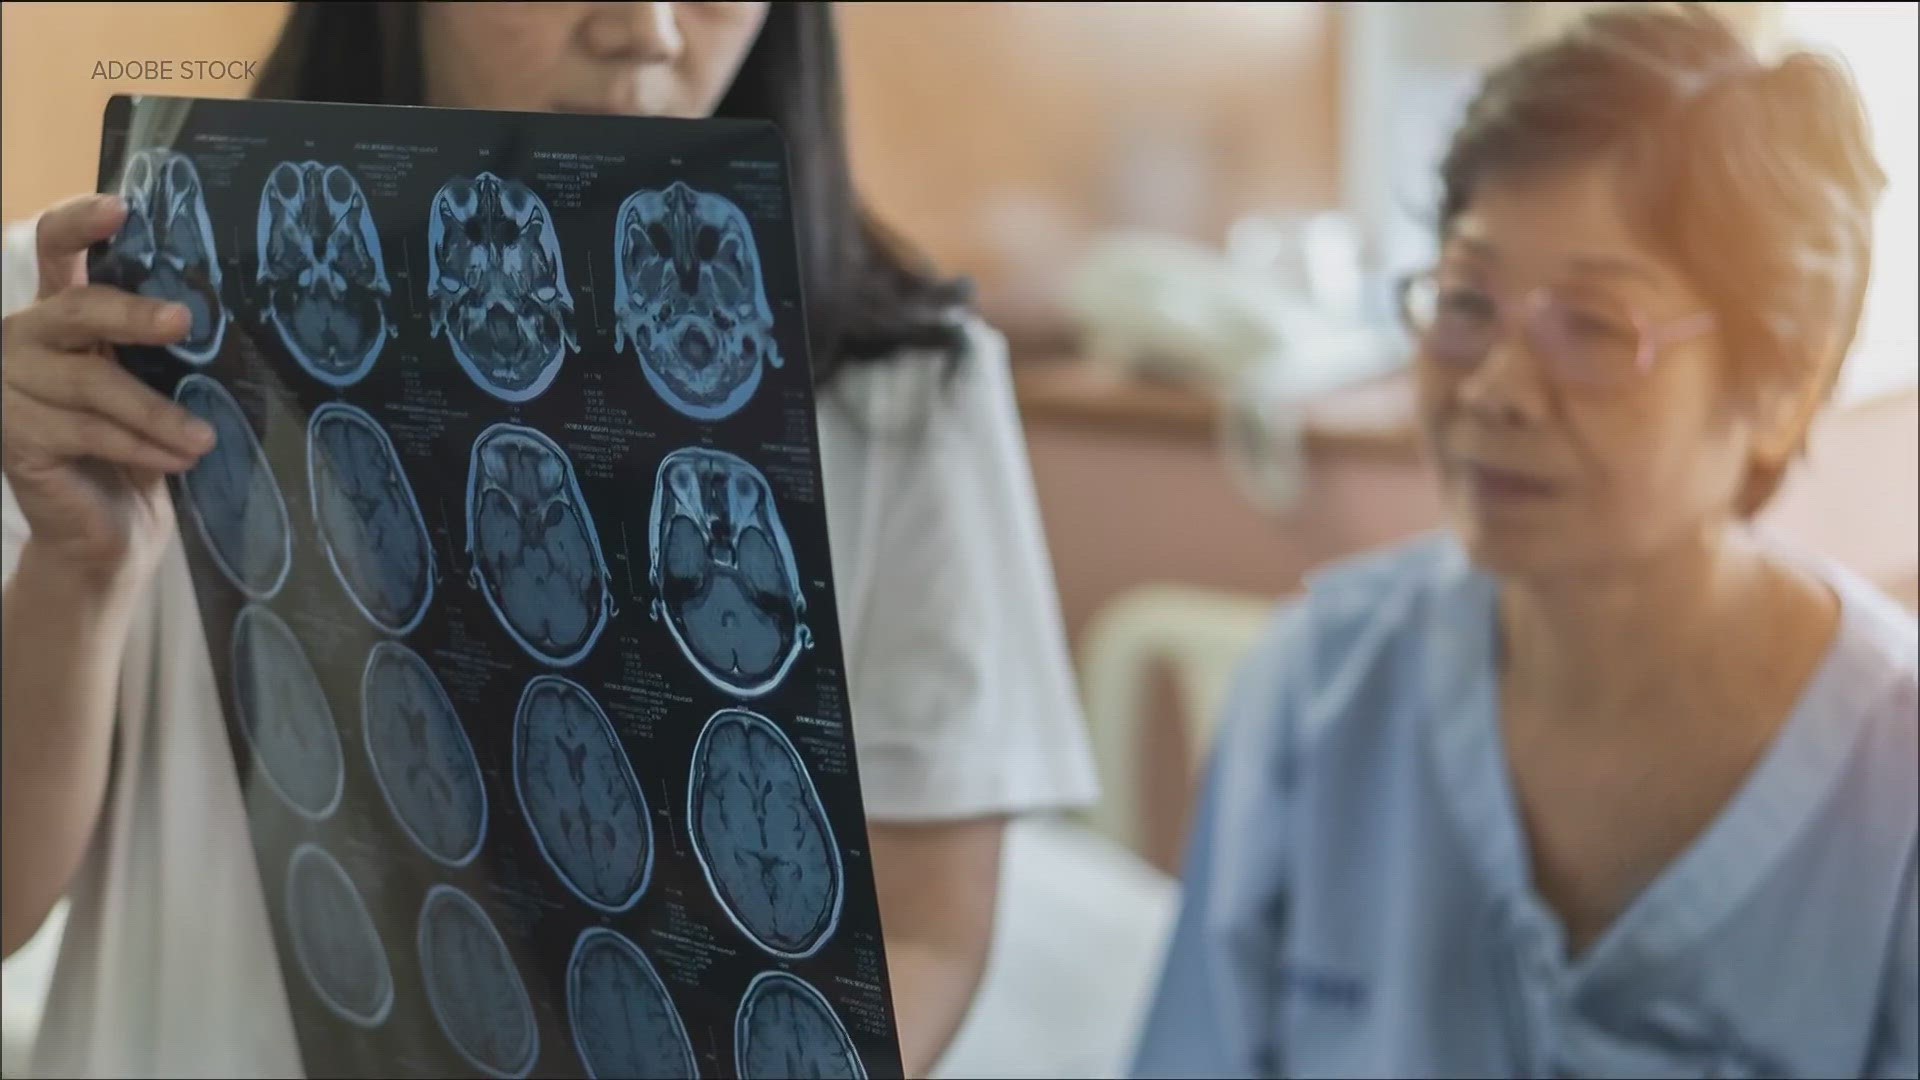 The upcoming FDA decision carries extra significance because insurers have held off on paying for the Alzheimer's treatment until it has full approval.